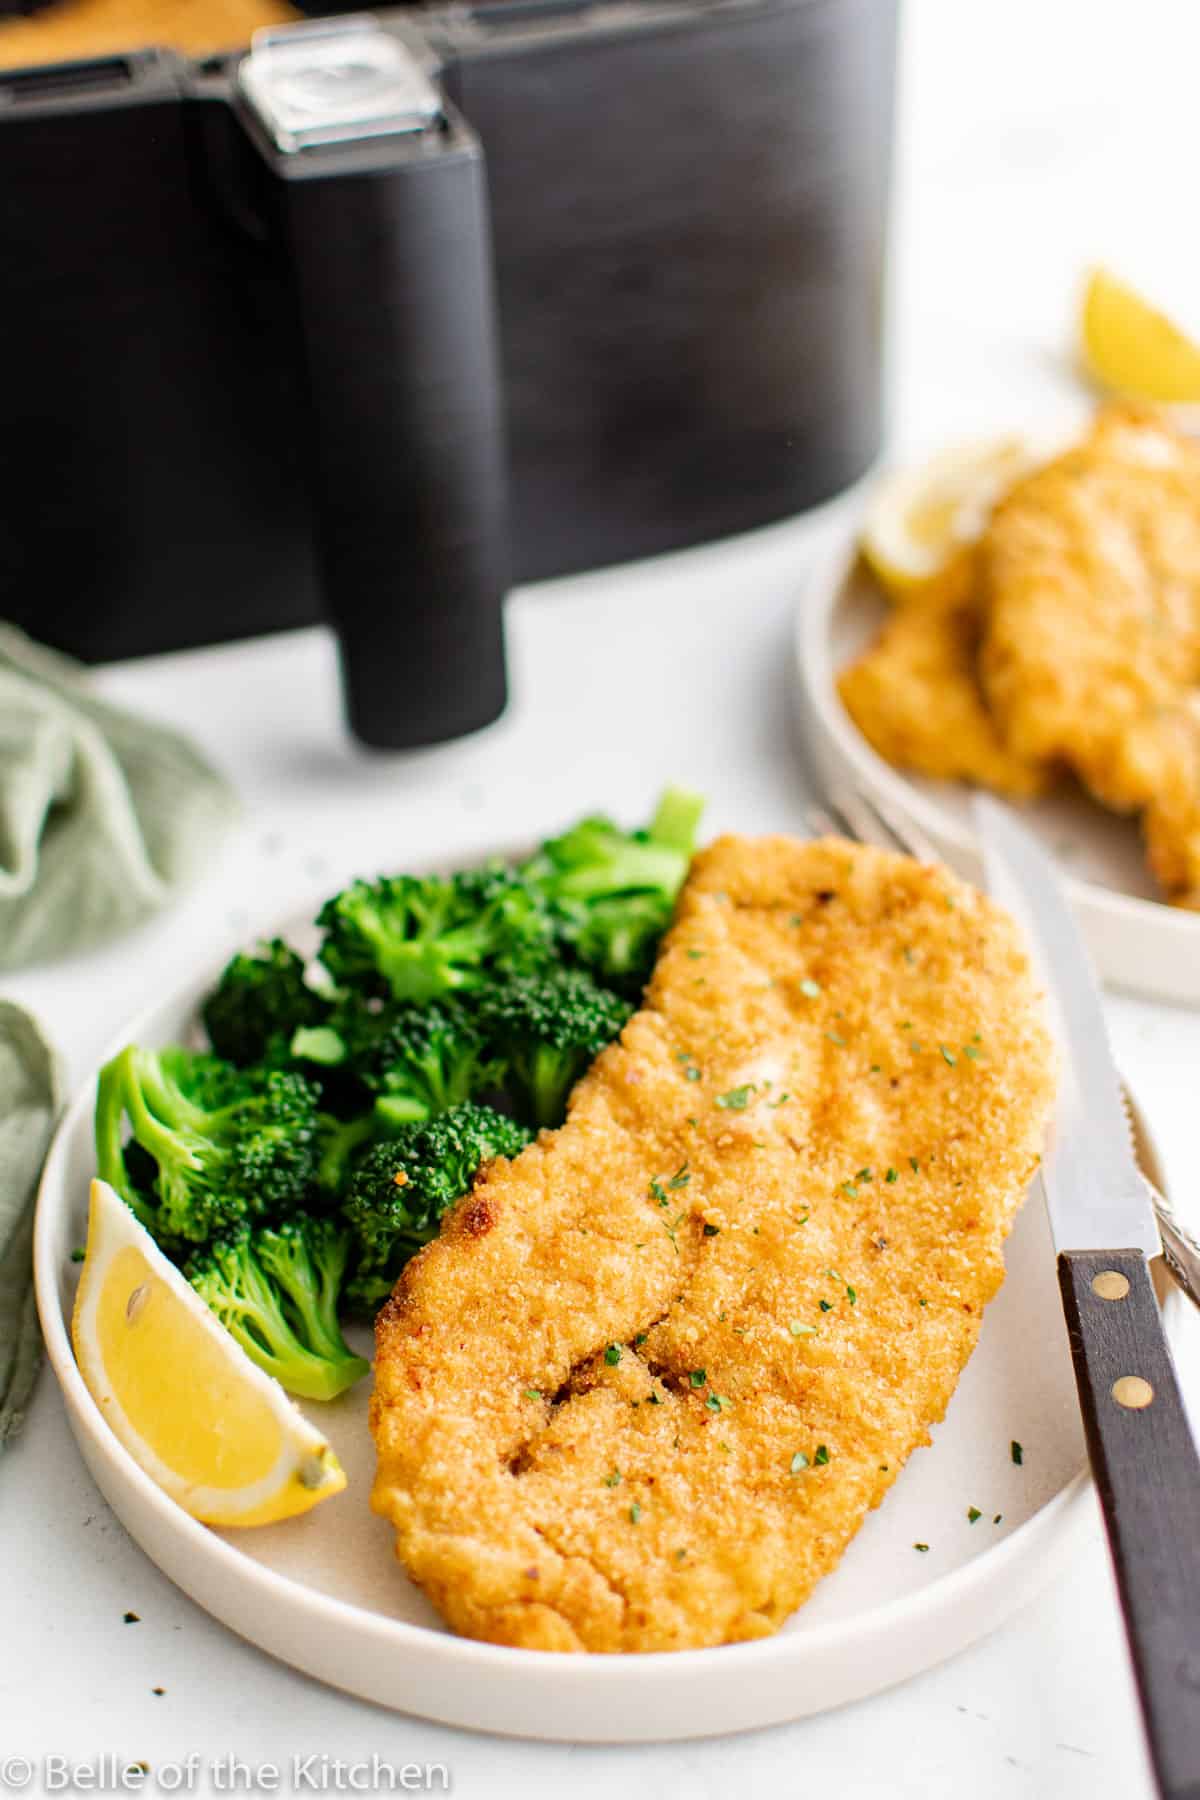 a breaded chicken cutlet and broccoli on a plate